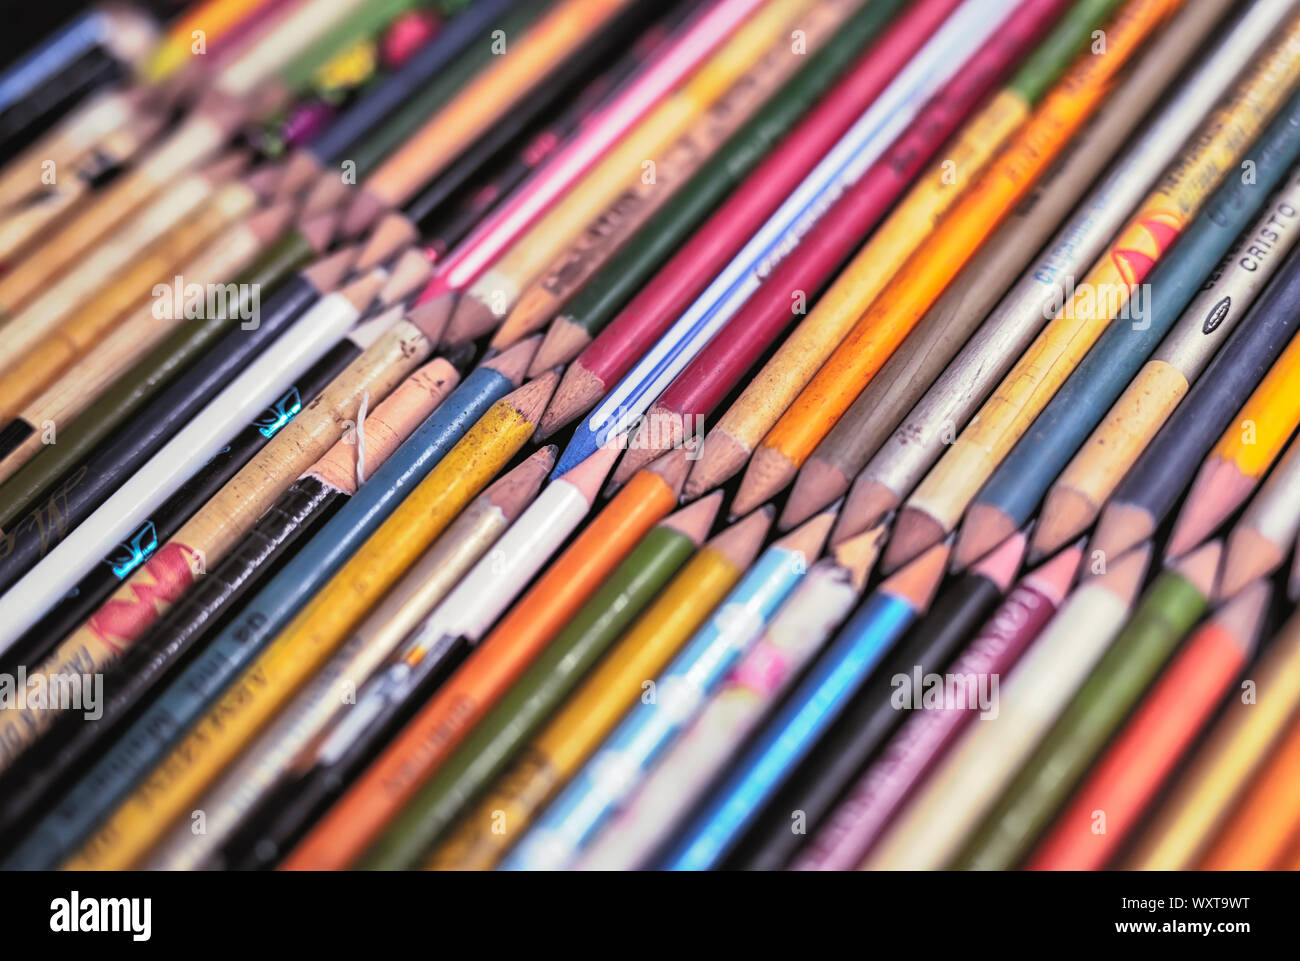 Photo of several old pencils, collection of pencils that no longer exist. Depth of field. Stock Photo